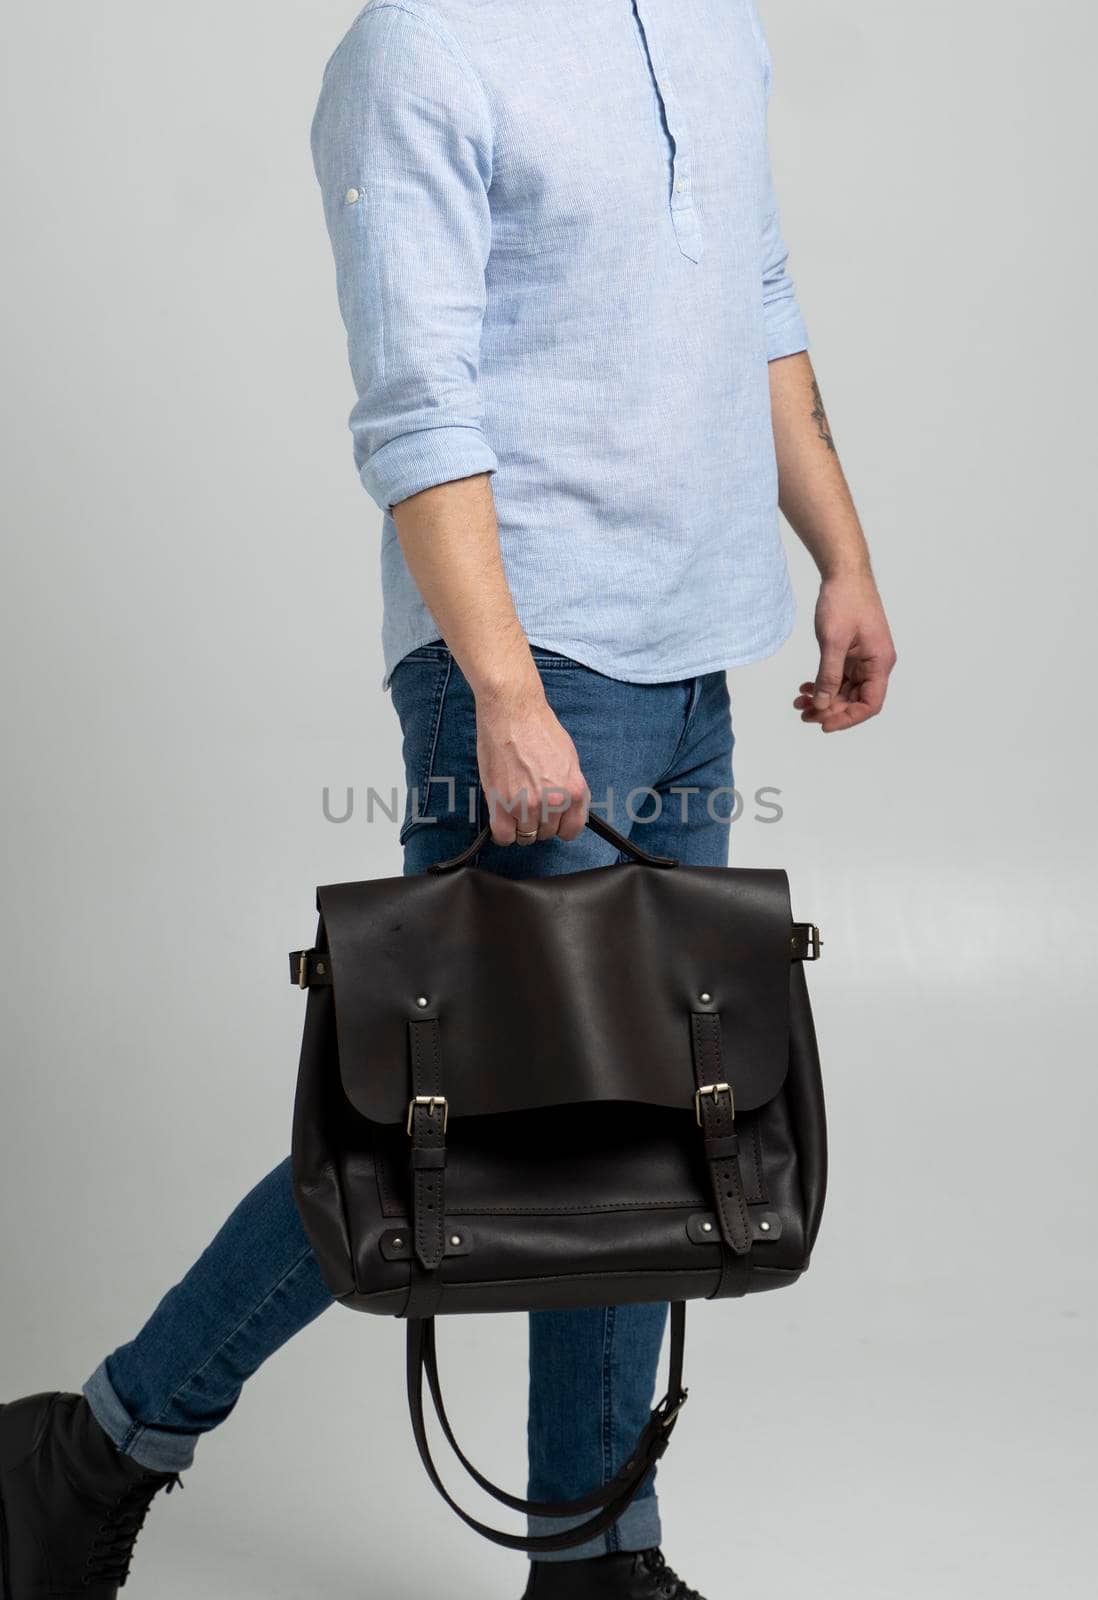 Brown men's shoulder leather bag for a documents and laptop holds by man in a blue shirt and jeans with a white background. Satchel, mens leather handmade briefcase